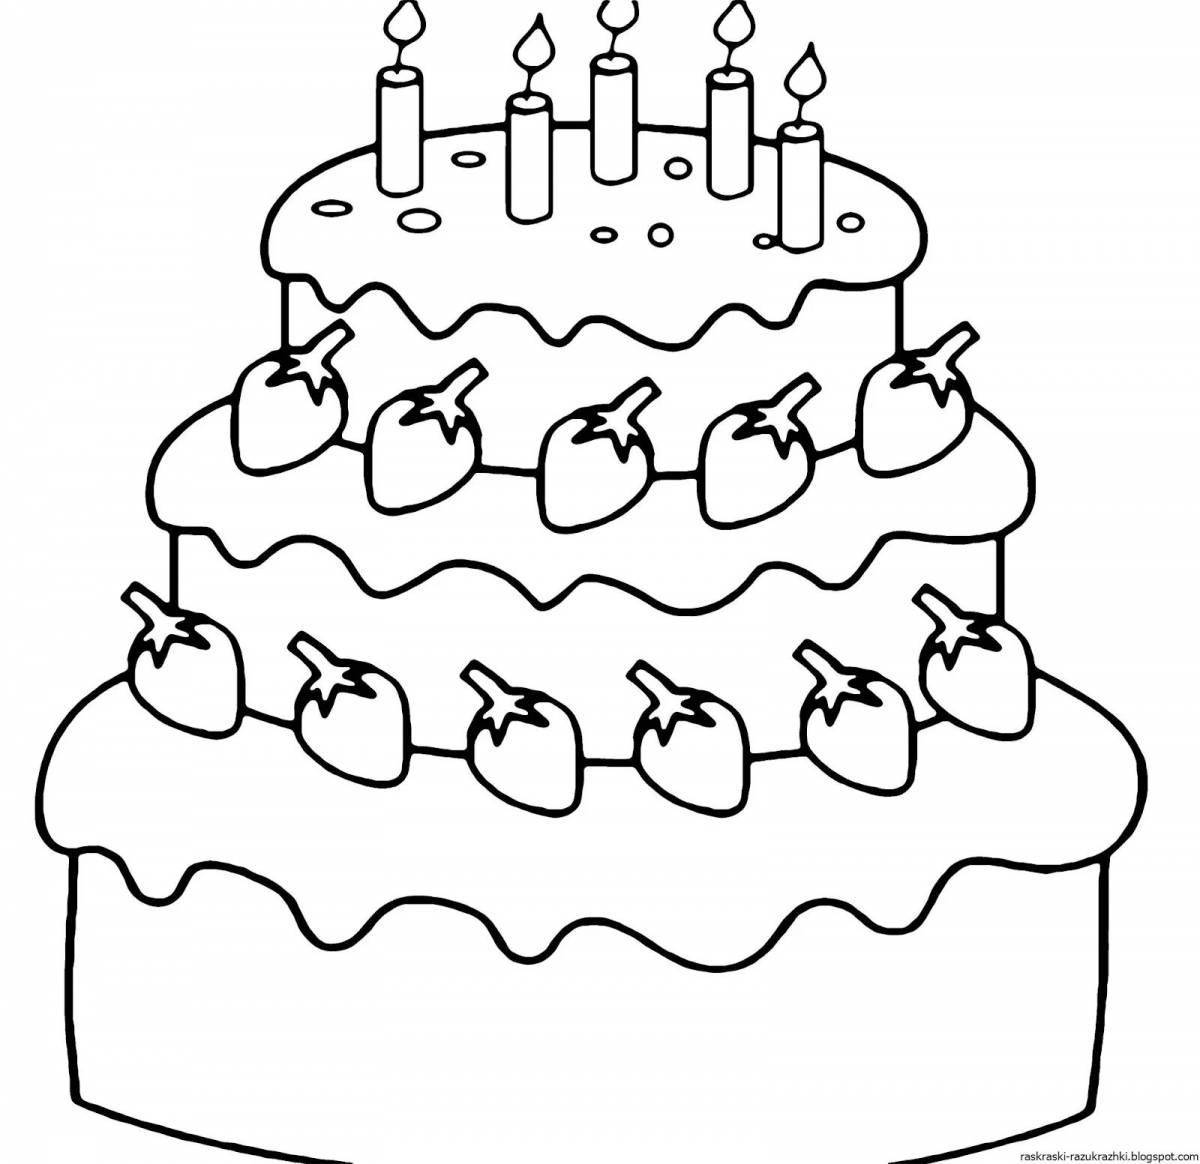 Playful cake coloring page for 5-6 year olds